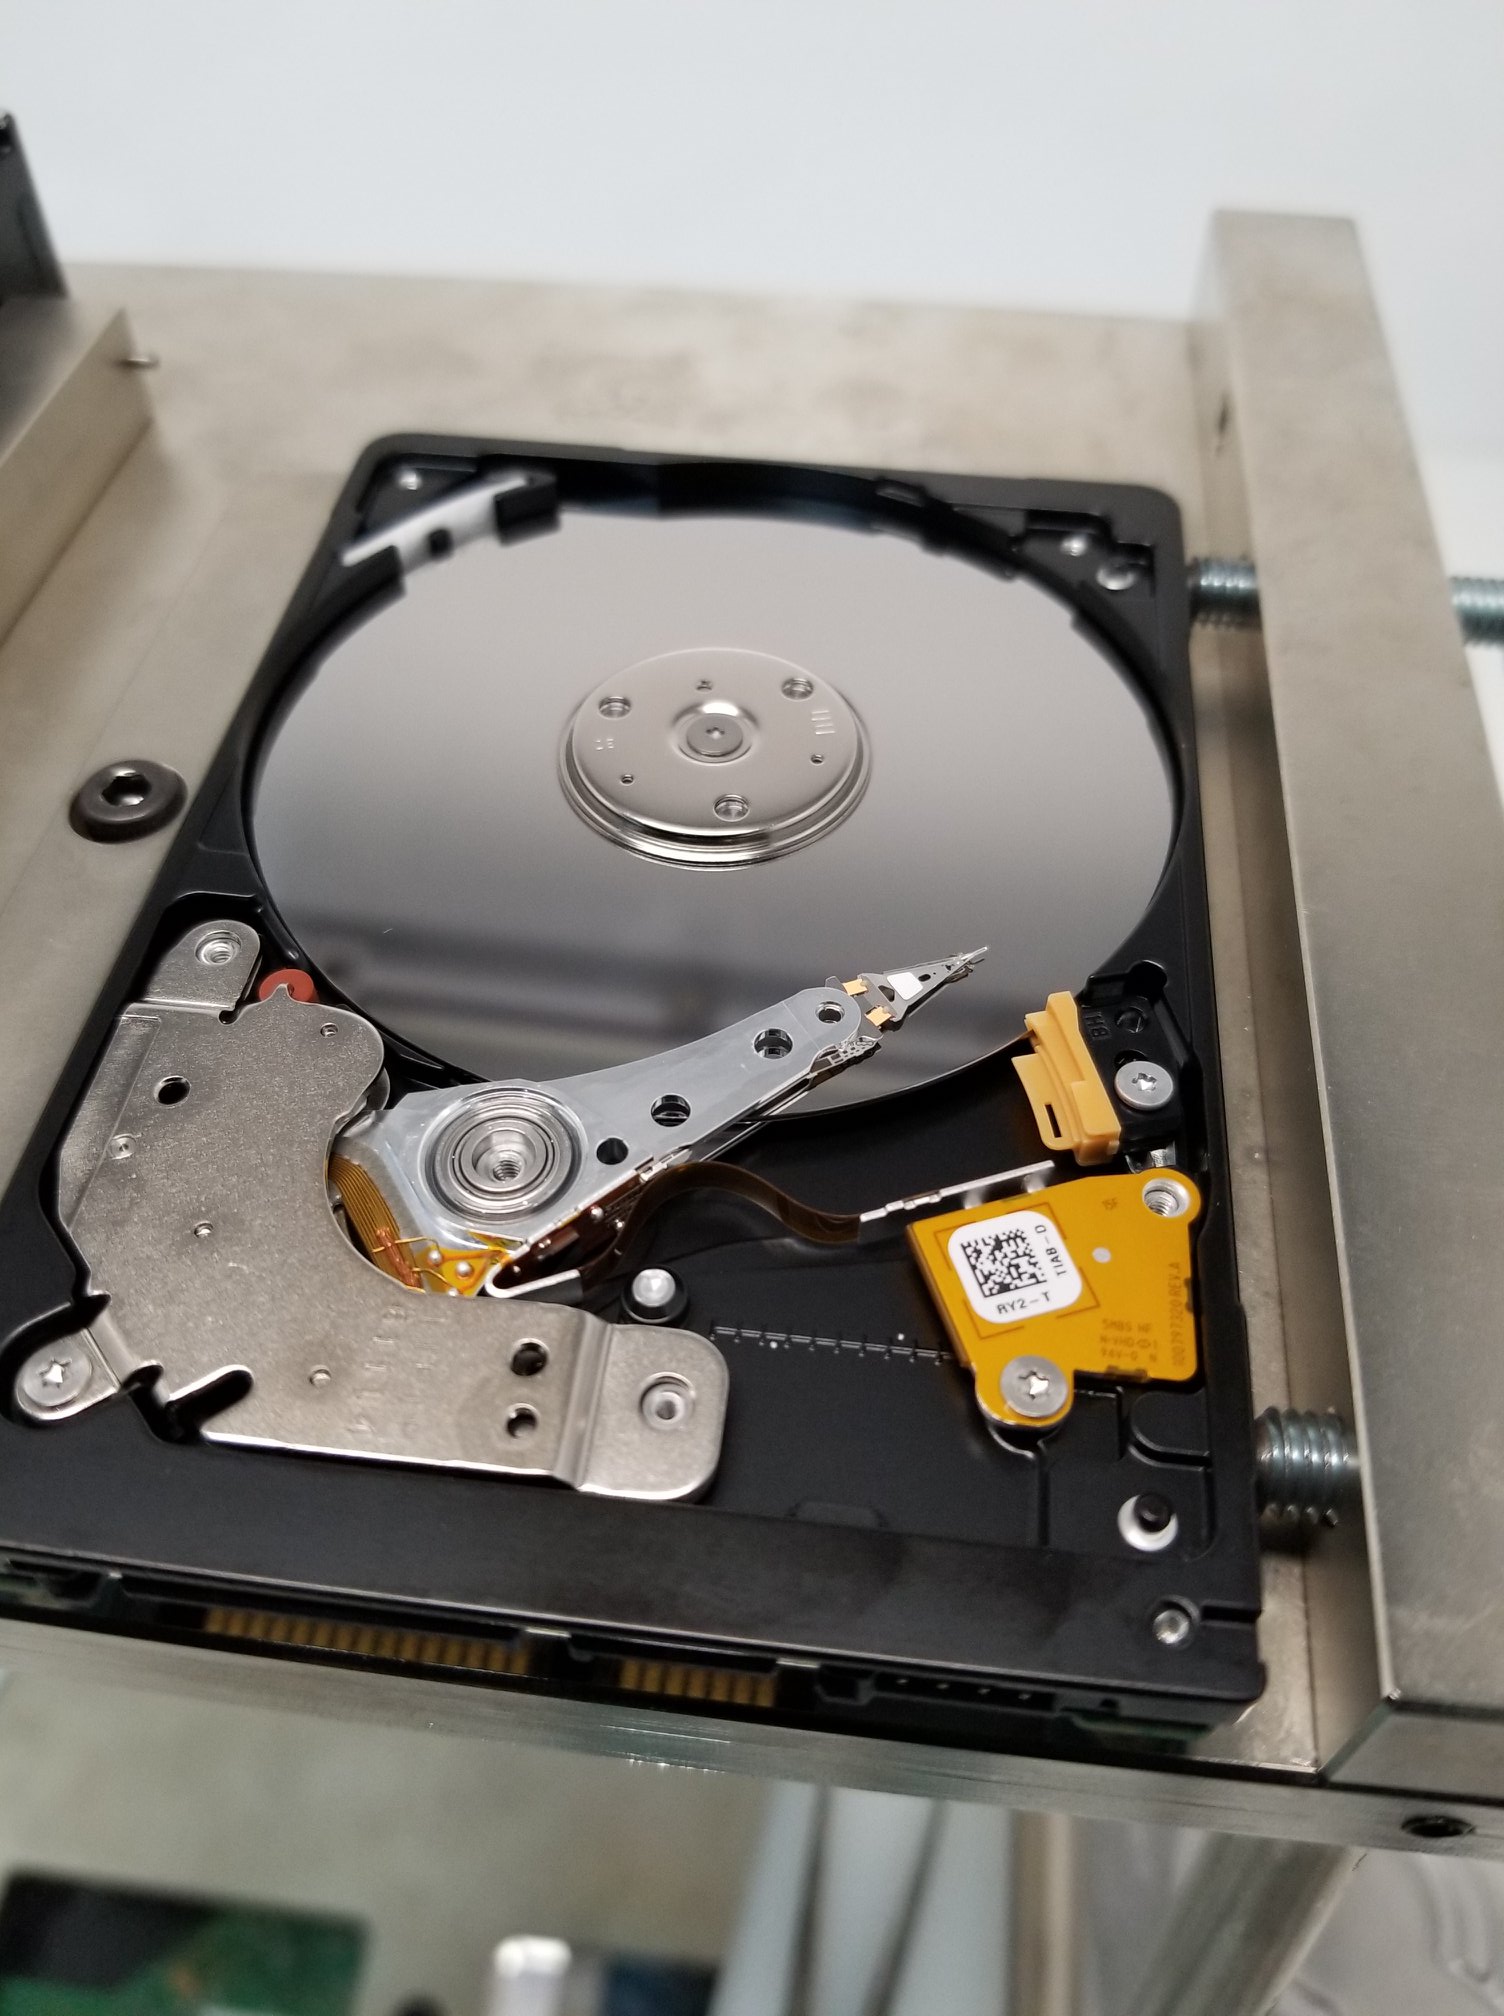 seagate external hard drive recovery tools